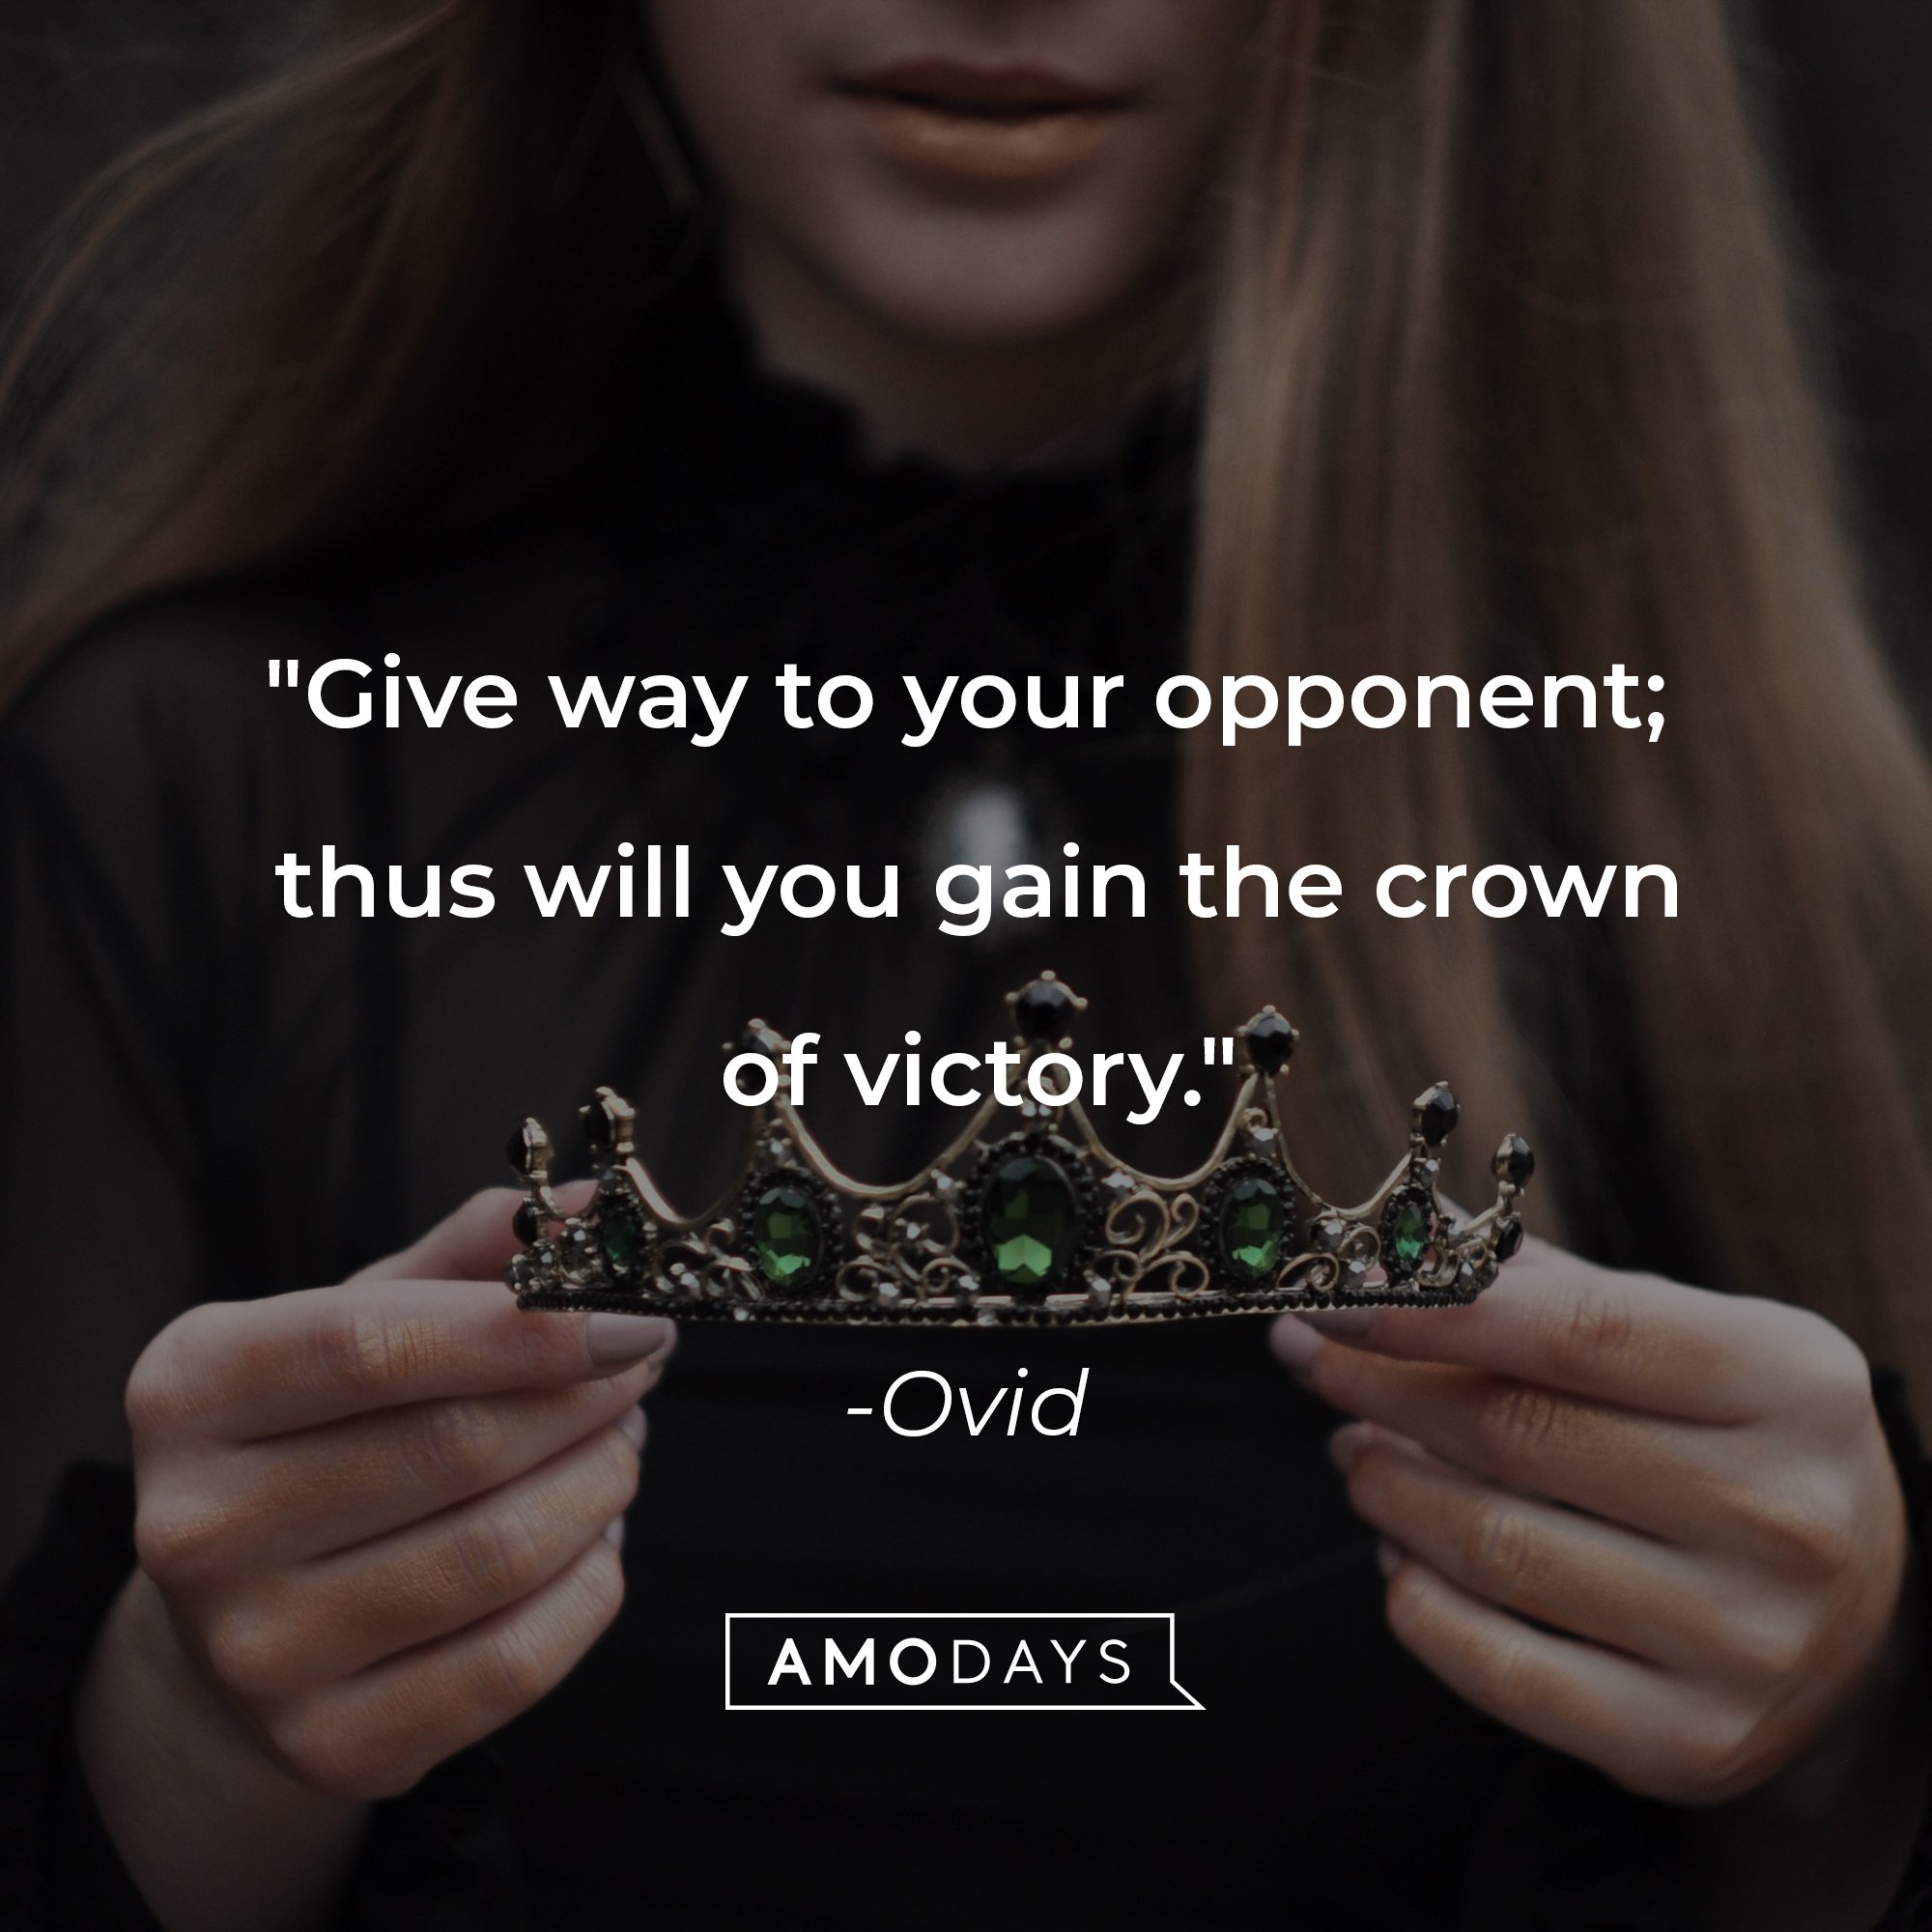 Ovid's quote: "Give way to your opponent; thus will you gain the crown of victory." | Image: AmoDays